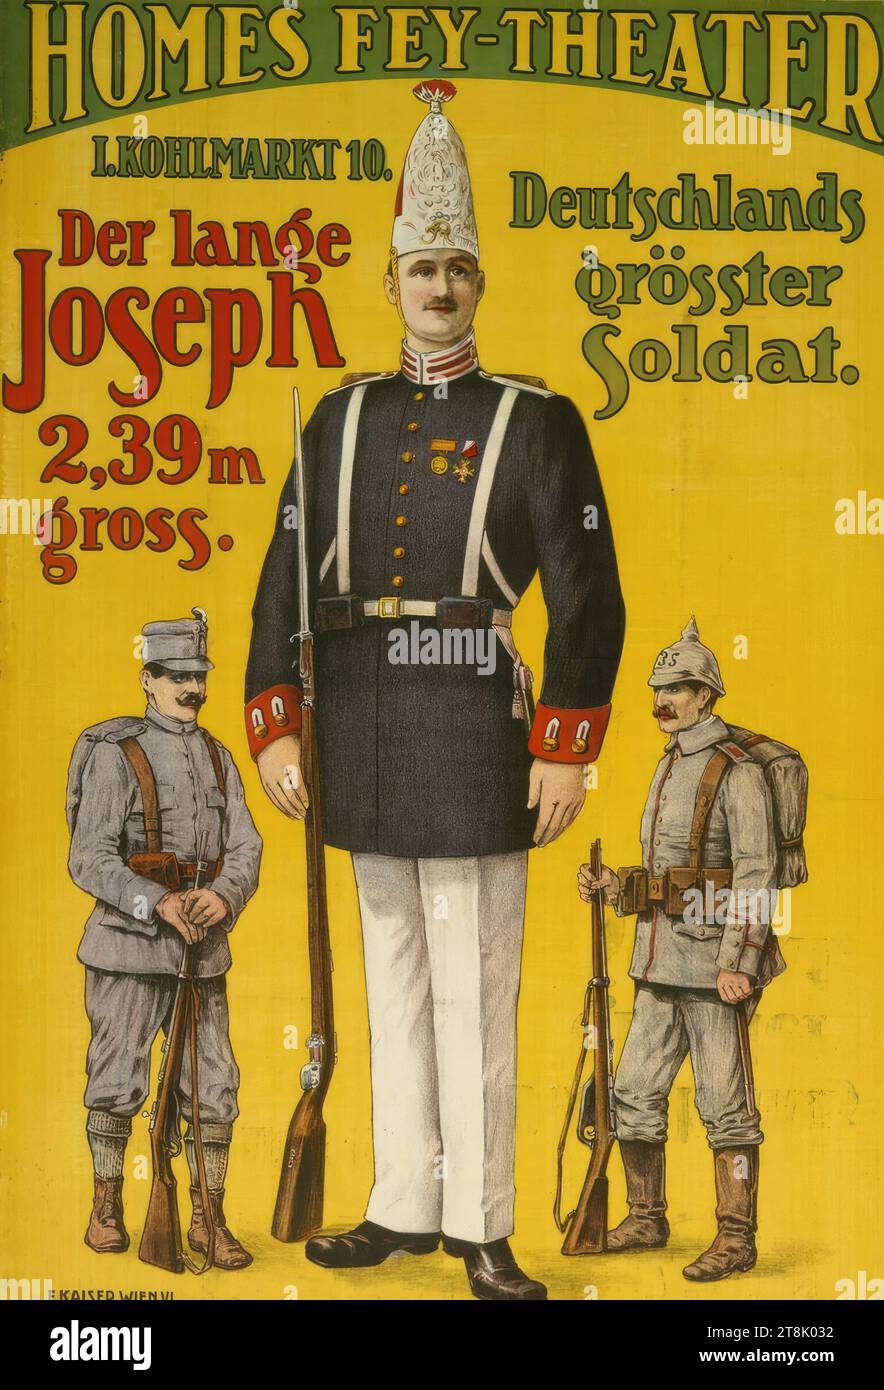 HOMES FEY THEATER; I. CABBAGE MARKET 10th; The long Joseph, Germany's greatest soldier, Anonymous, before 1914, print, planographic print, sheet: 1005 mm x 700 mm Stock Photo